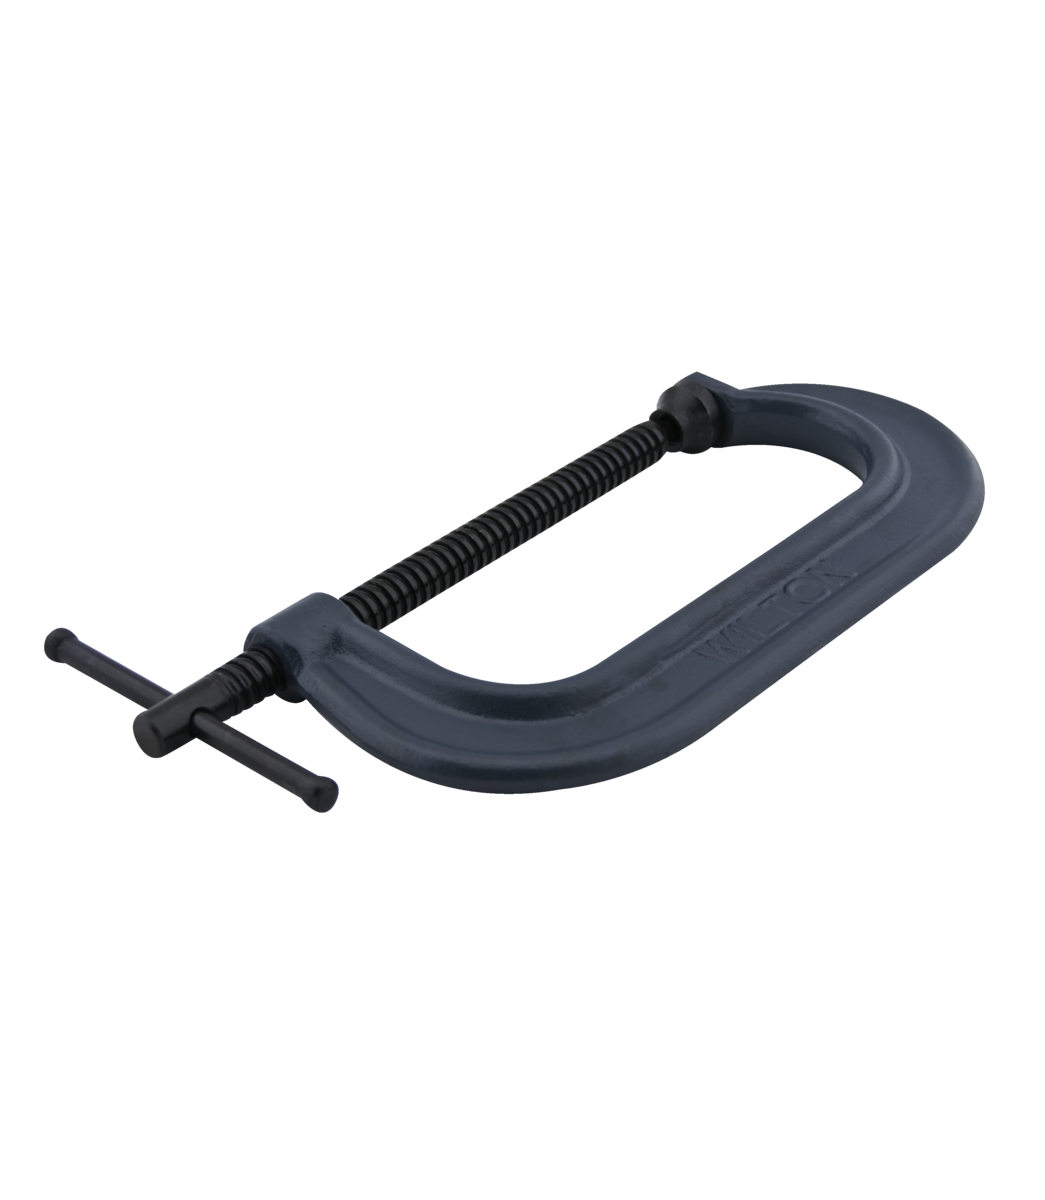 WILTON 800 Series Standard Depth Drop Forged C-Clamp, 0 - 6” Opening, 2-15/16” Throat